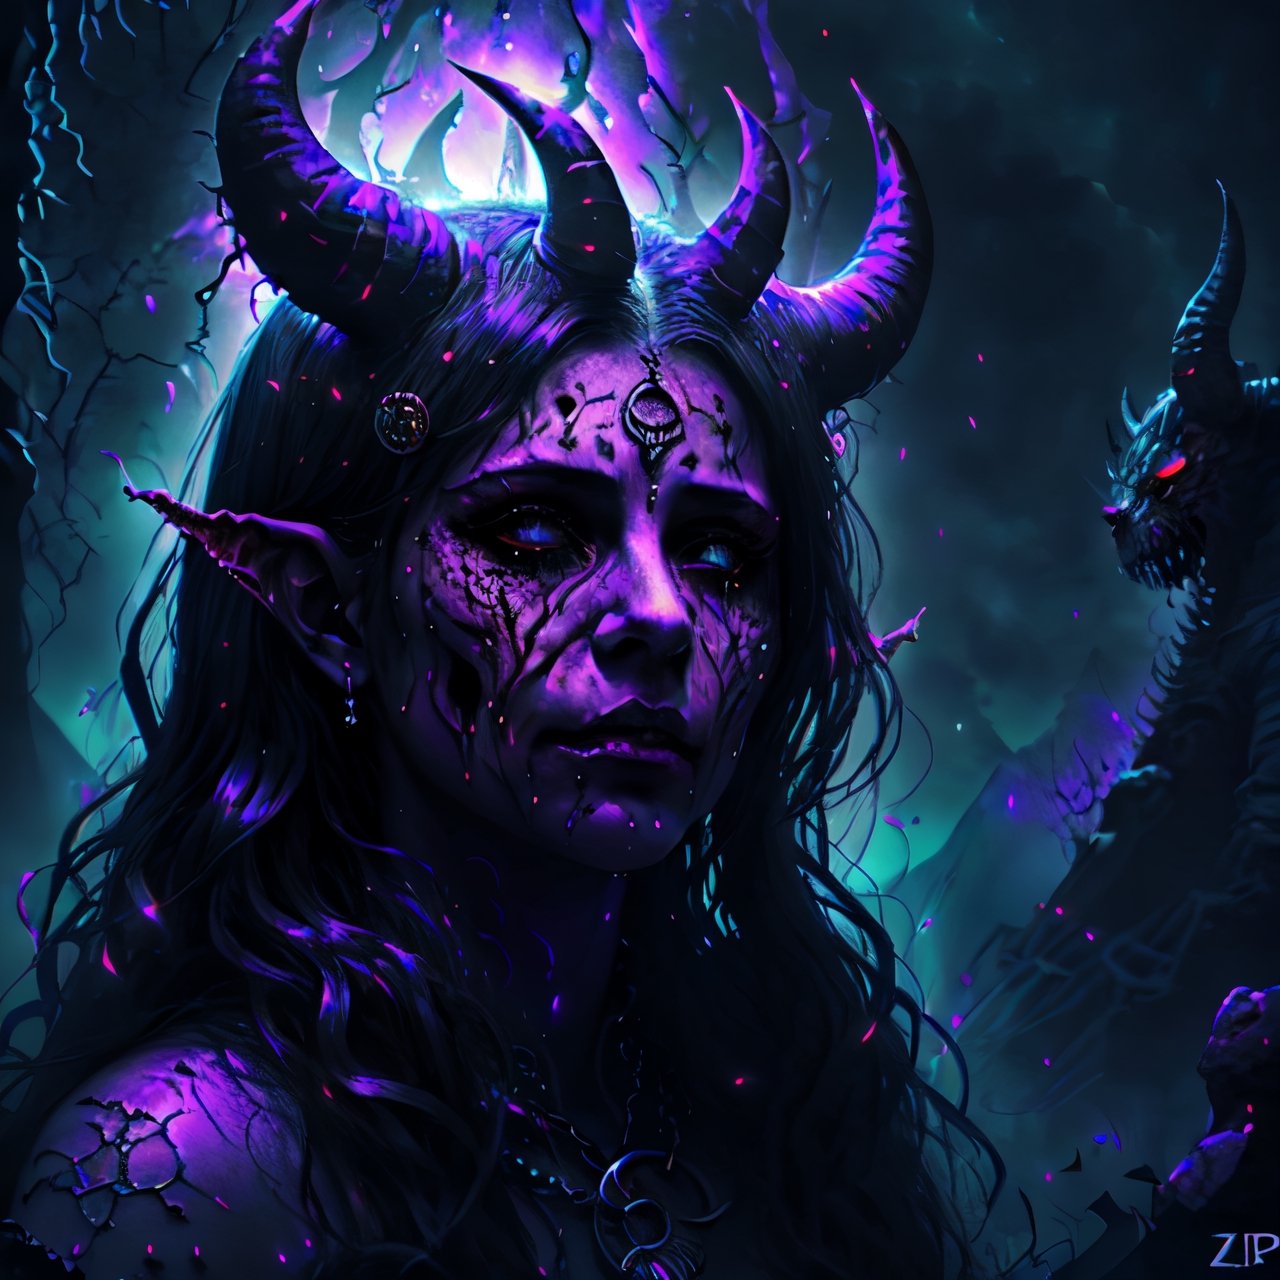 Visualized as a digital illustration, a cult leader offers sacrifices to a devil god in a nightmarish scene inspired by the works of Zdzisław Beksiński. The image is bathed in an otherworldly purple hue, emphasizing the grotesque details. The leader's face is a twisted mask of devotion and horror, illuminated by the sickly glow of occult symbols.

300 DPI, HD, 8K, Best Perspective, Best Lighting, Best Composition, Good Posture, High Resolution, High Quality, 4K Render, Highly Denoised, Clear distinction between object and body parts, Masterpiece, Beautiful face, 
Beautiful body, smooth skin, glistening skin, highly detailed background, highly detailed clothes, 
highly detailed face, beautiful eyes, beautiful lips, cute, beautiful scenery, gorgeous, beautiful clothes, best lighting, cinematic , great colors, great lighting, masterpiece, Good body posture, proper posture, correct hands, 
correct fingers, right number of fingers, clear image, face expression should be good, clear face expression, correct face , correct face expression,
,demonictech,fantasy00d,reddemon,More Detail